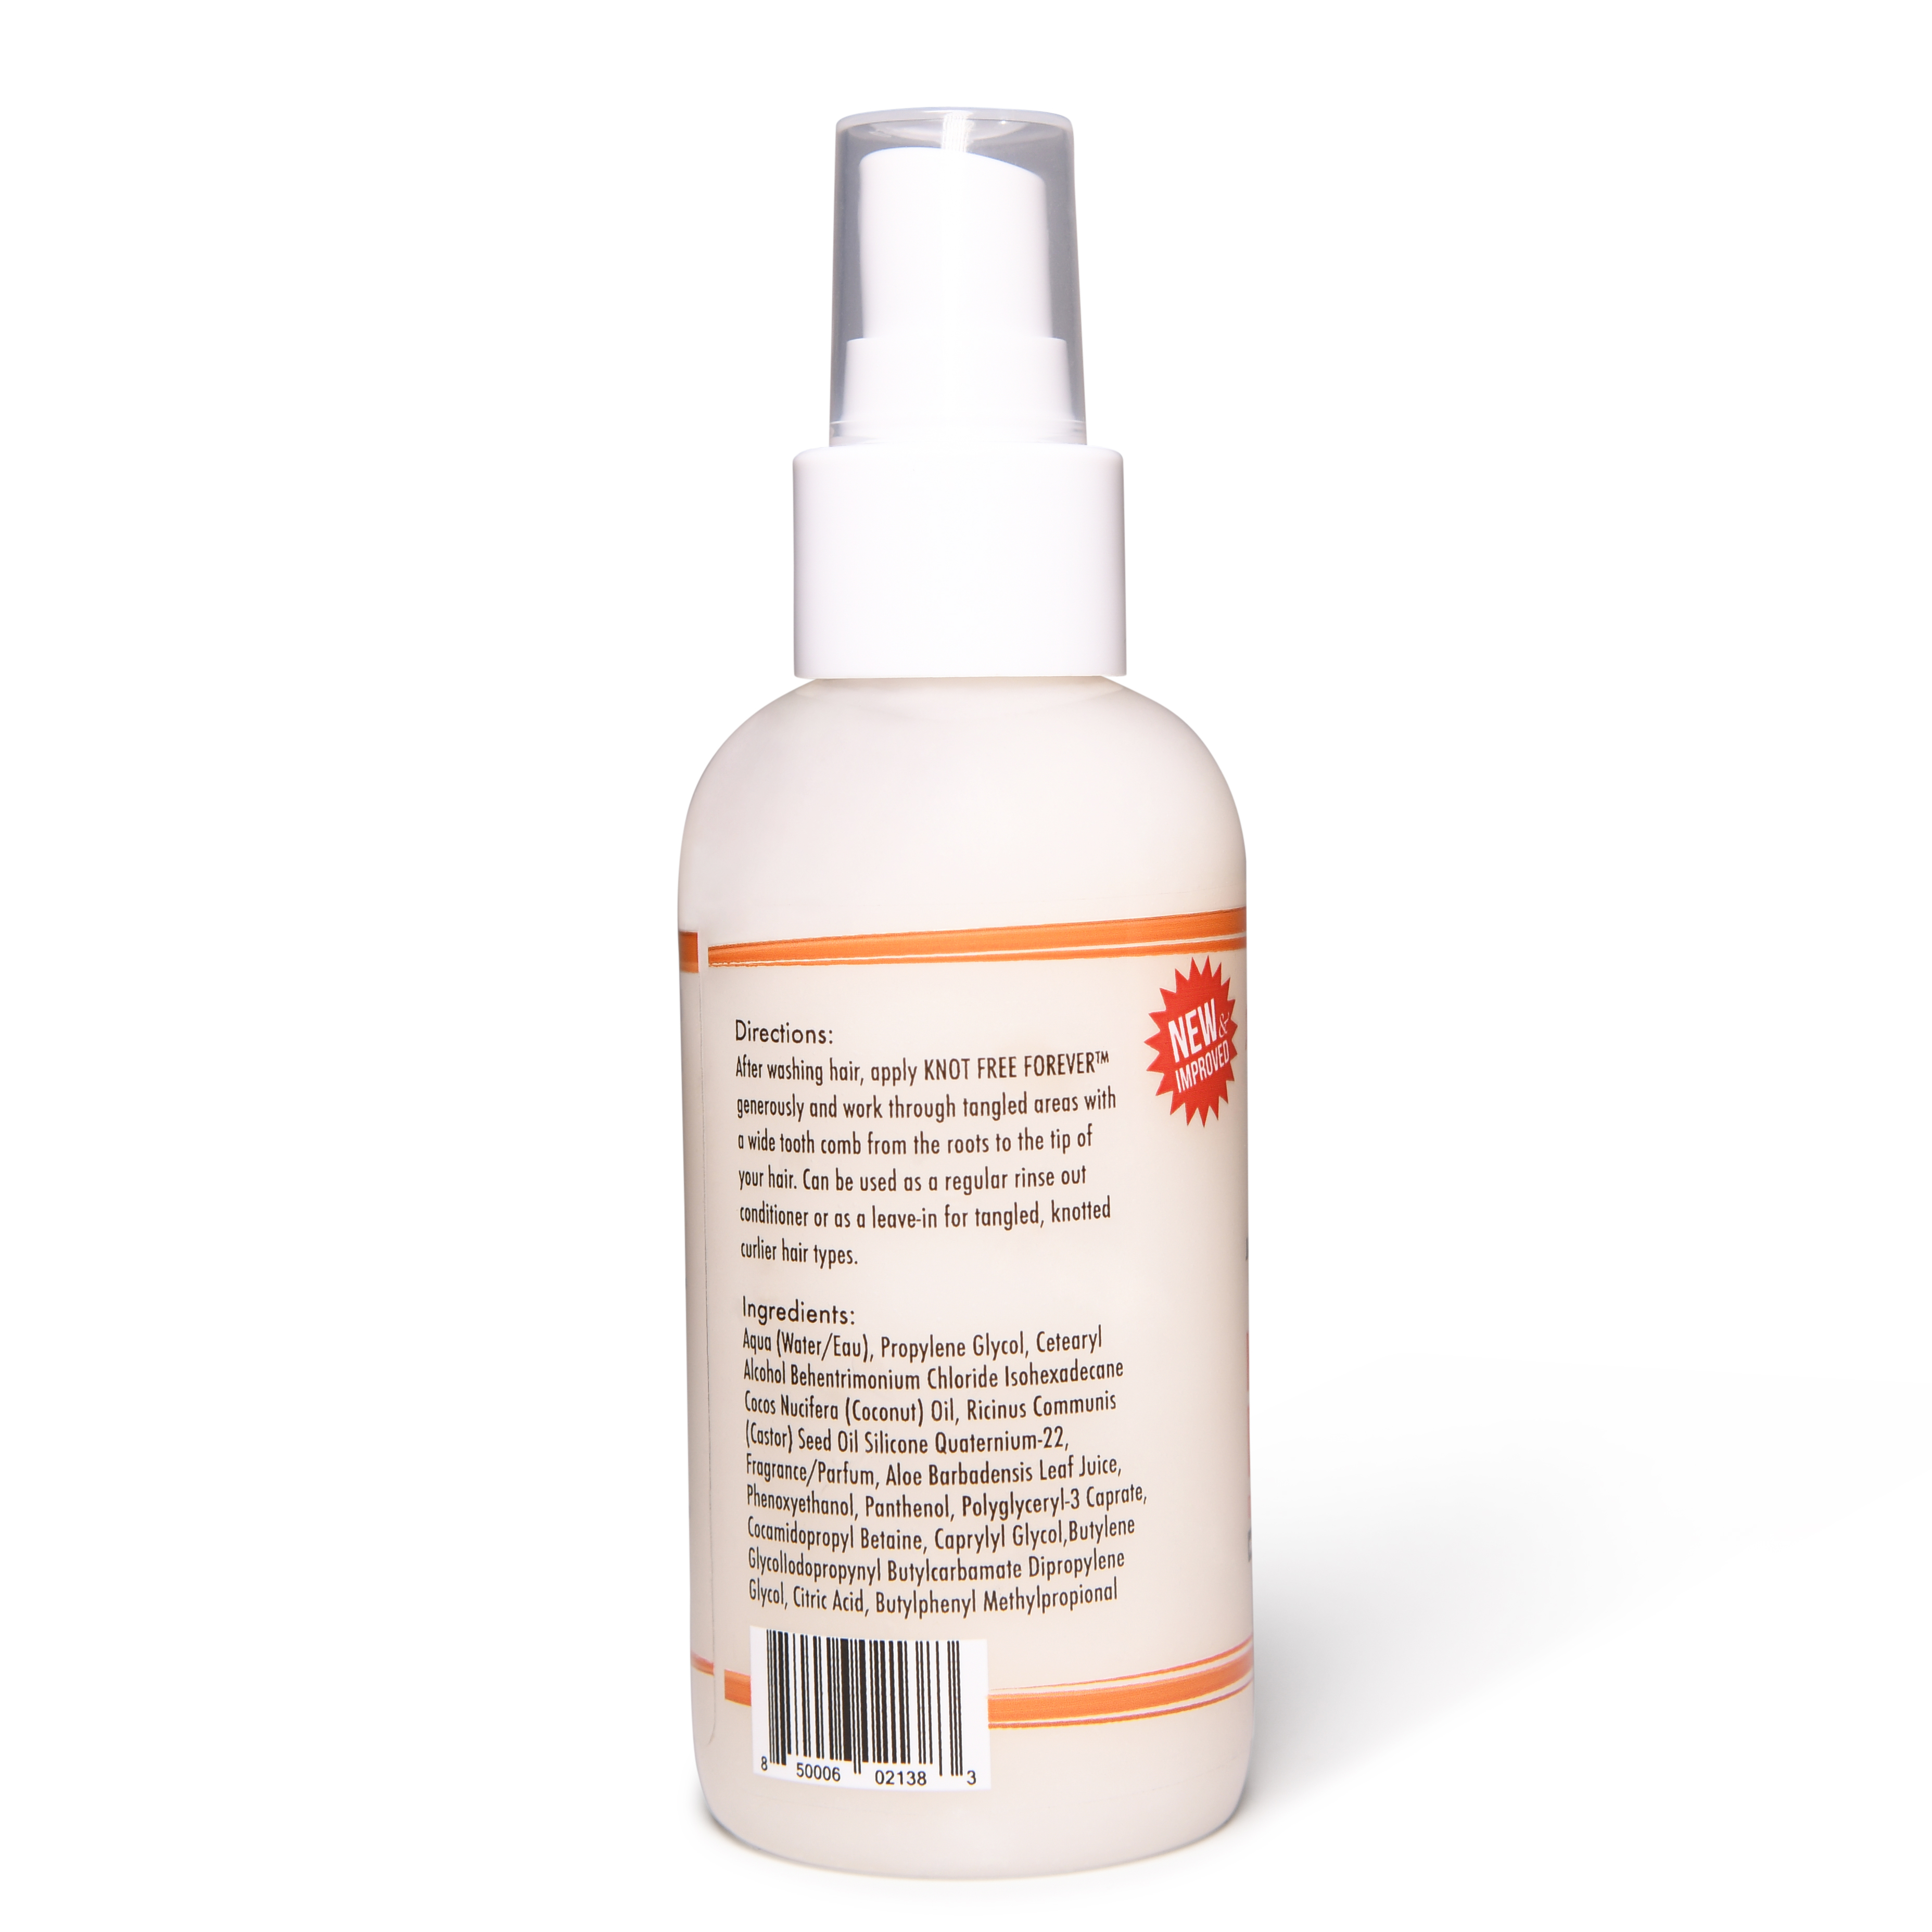 Sunny Isle Knot Free Forever Leave In Conditioner 4oz - image 2 of 2